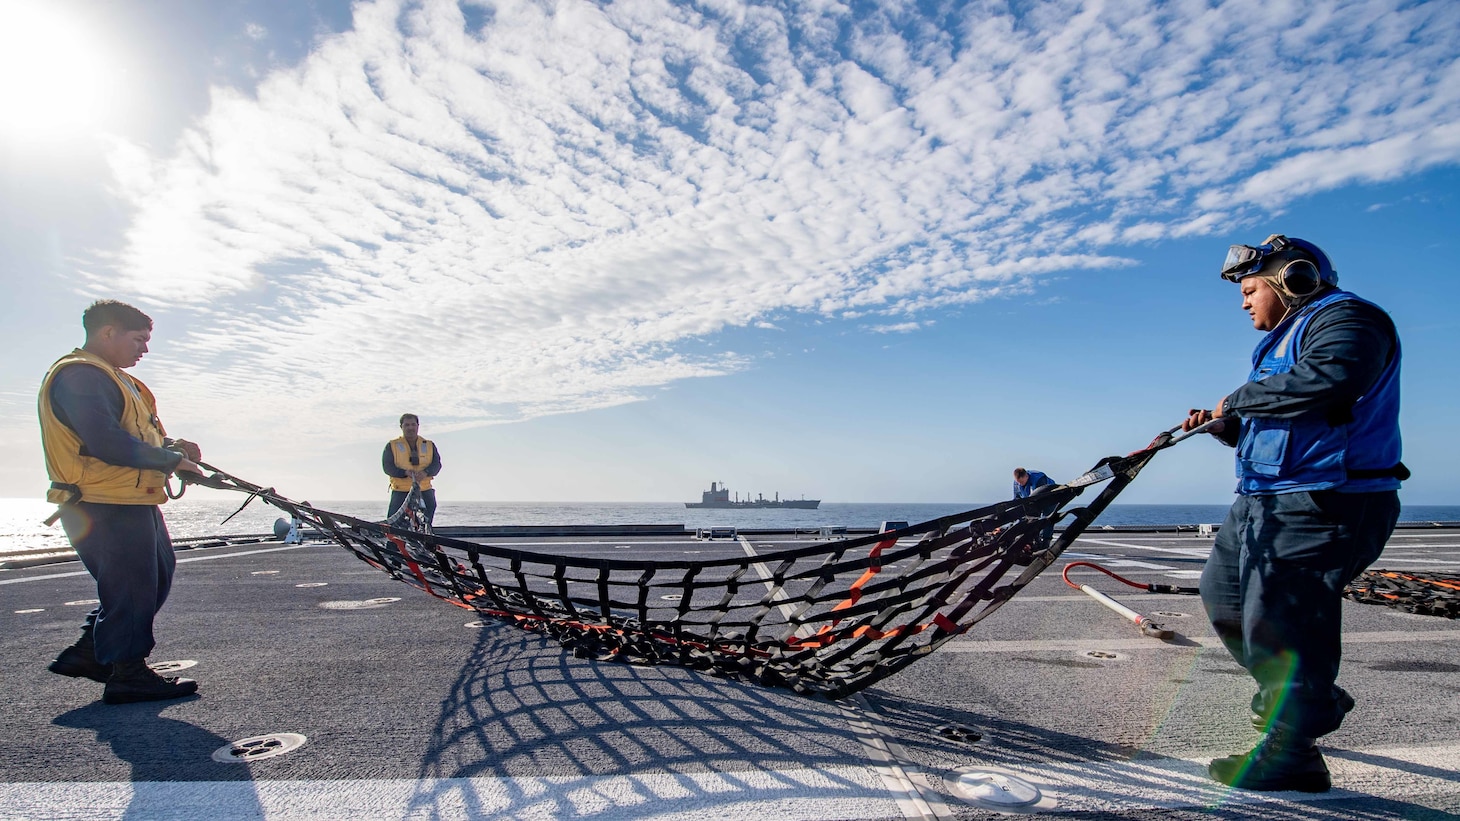 SOUTH CHINA SEA (Feb. 2, 2022) Sailors prepare for a vertical replenishment with fleet replenishment oiler USNS Guadalupe (T-AO 200) aboard Independence-variant littoral combat ship USS Charleston (LCS 18). Charleston, part of Destroyer Squadron (DESRON) 7, is on a rotational deployment in the U.S. 7th Fleet area of operation to enhance interoperability with partners and serve as a ready-response force in support of a free and open Indo-Pacific region. (U.S. Navy photo by Mass Communication Specialist 2nd Class Ryan M. Breeden)